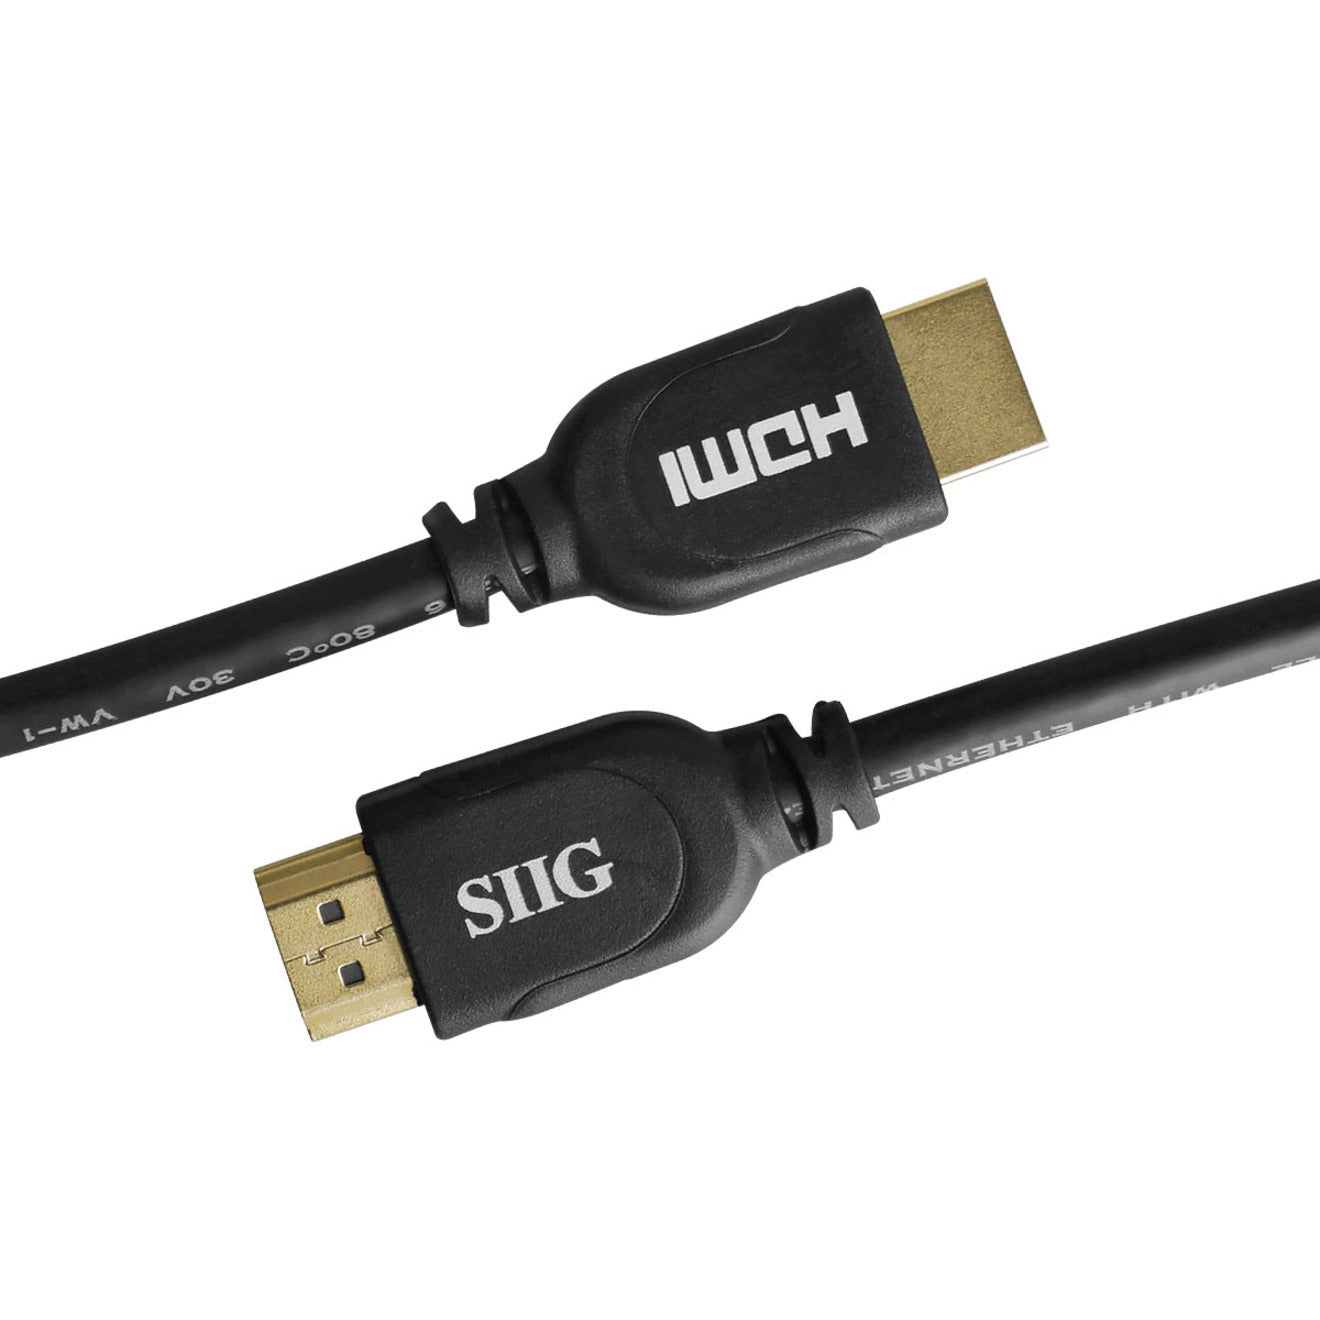 SIIG CB-H20412-S1 HDMI Cable, 3.28 ft, Molded, Copper Conductor, Gold Plated Connectors, Shielded, Black